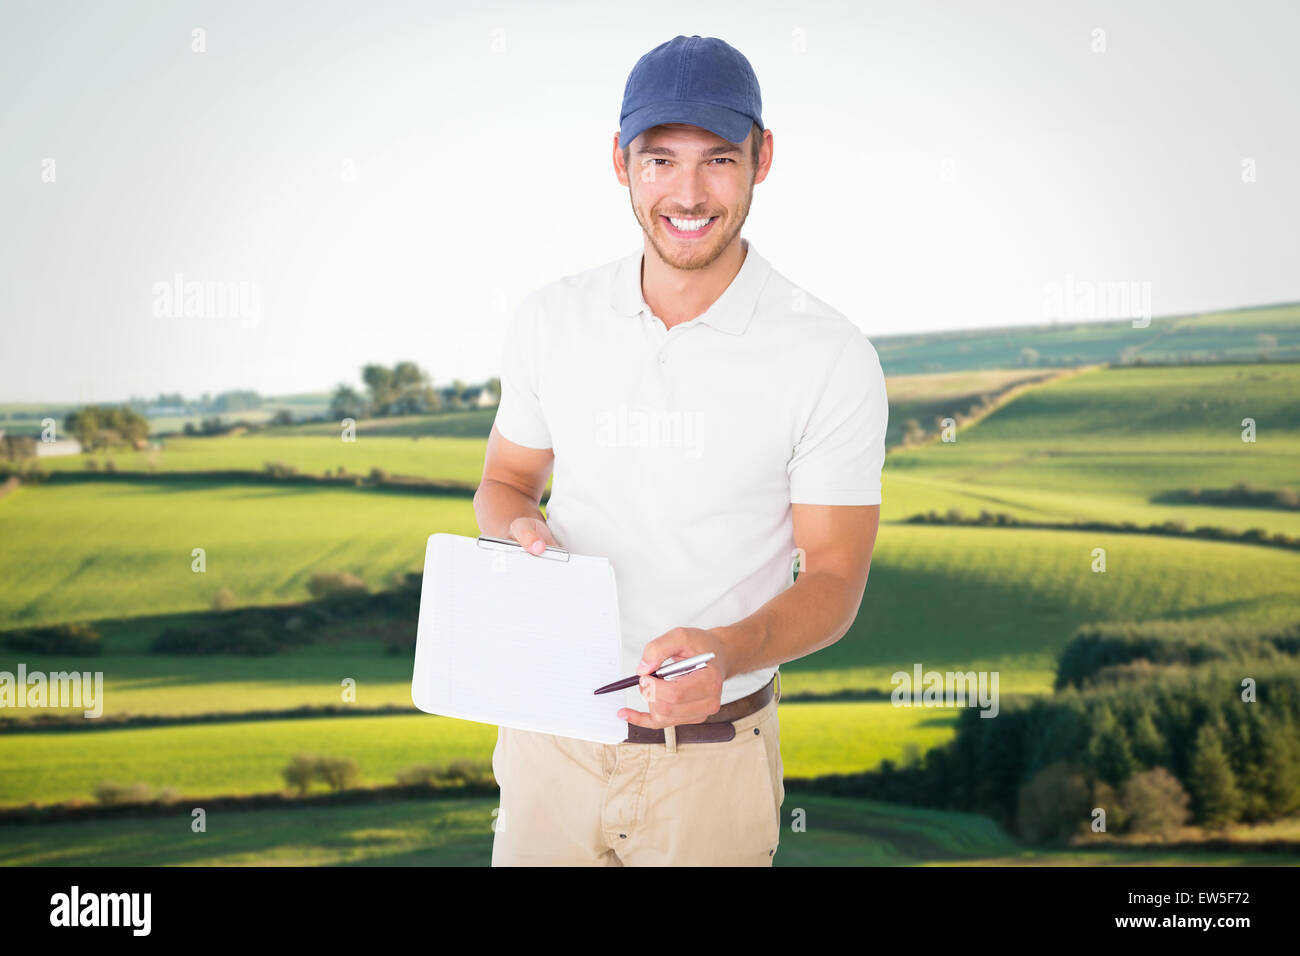 Composite image of delivery man holding clipboard Banque D'Images